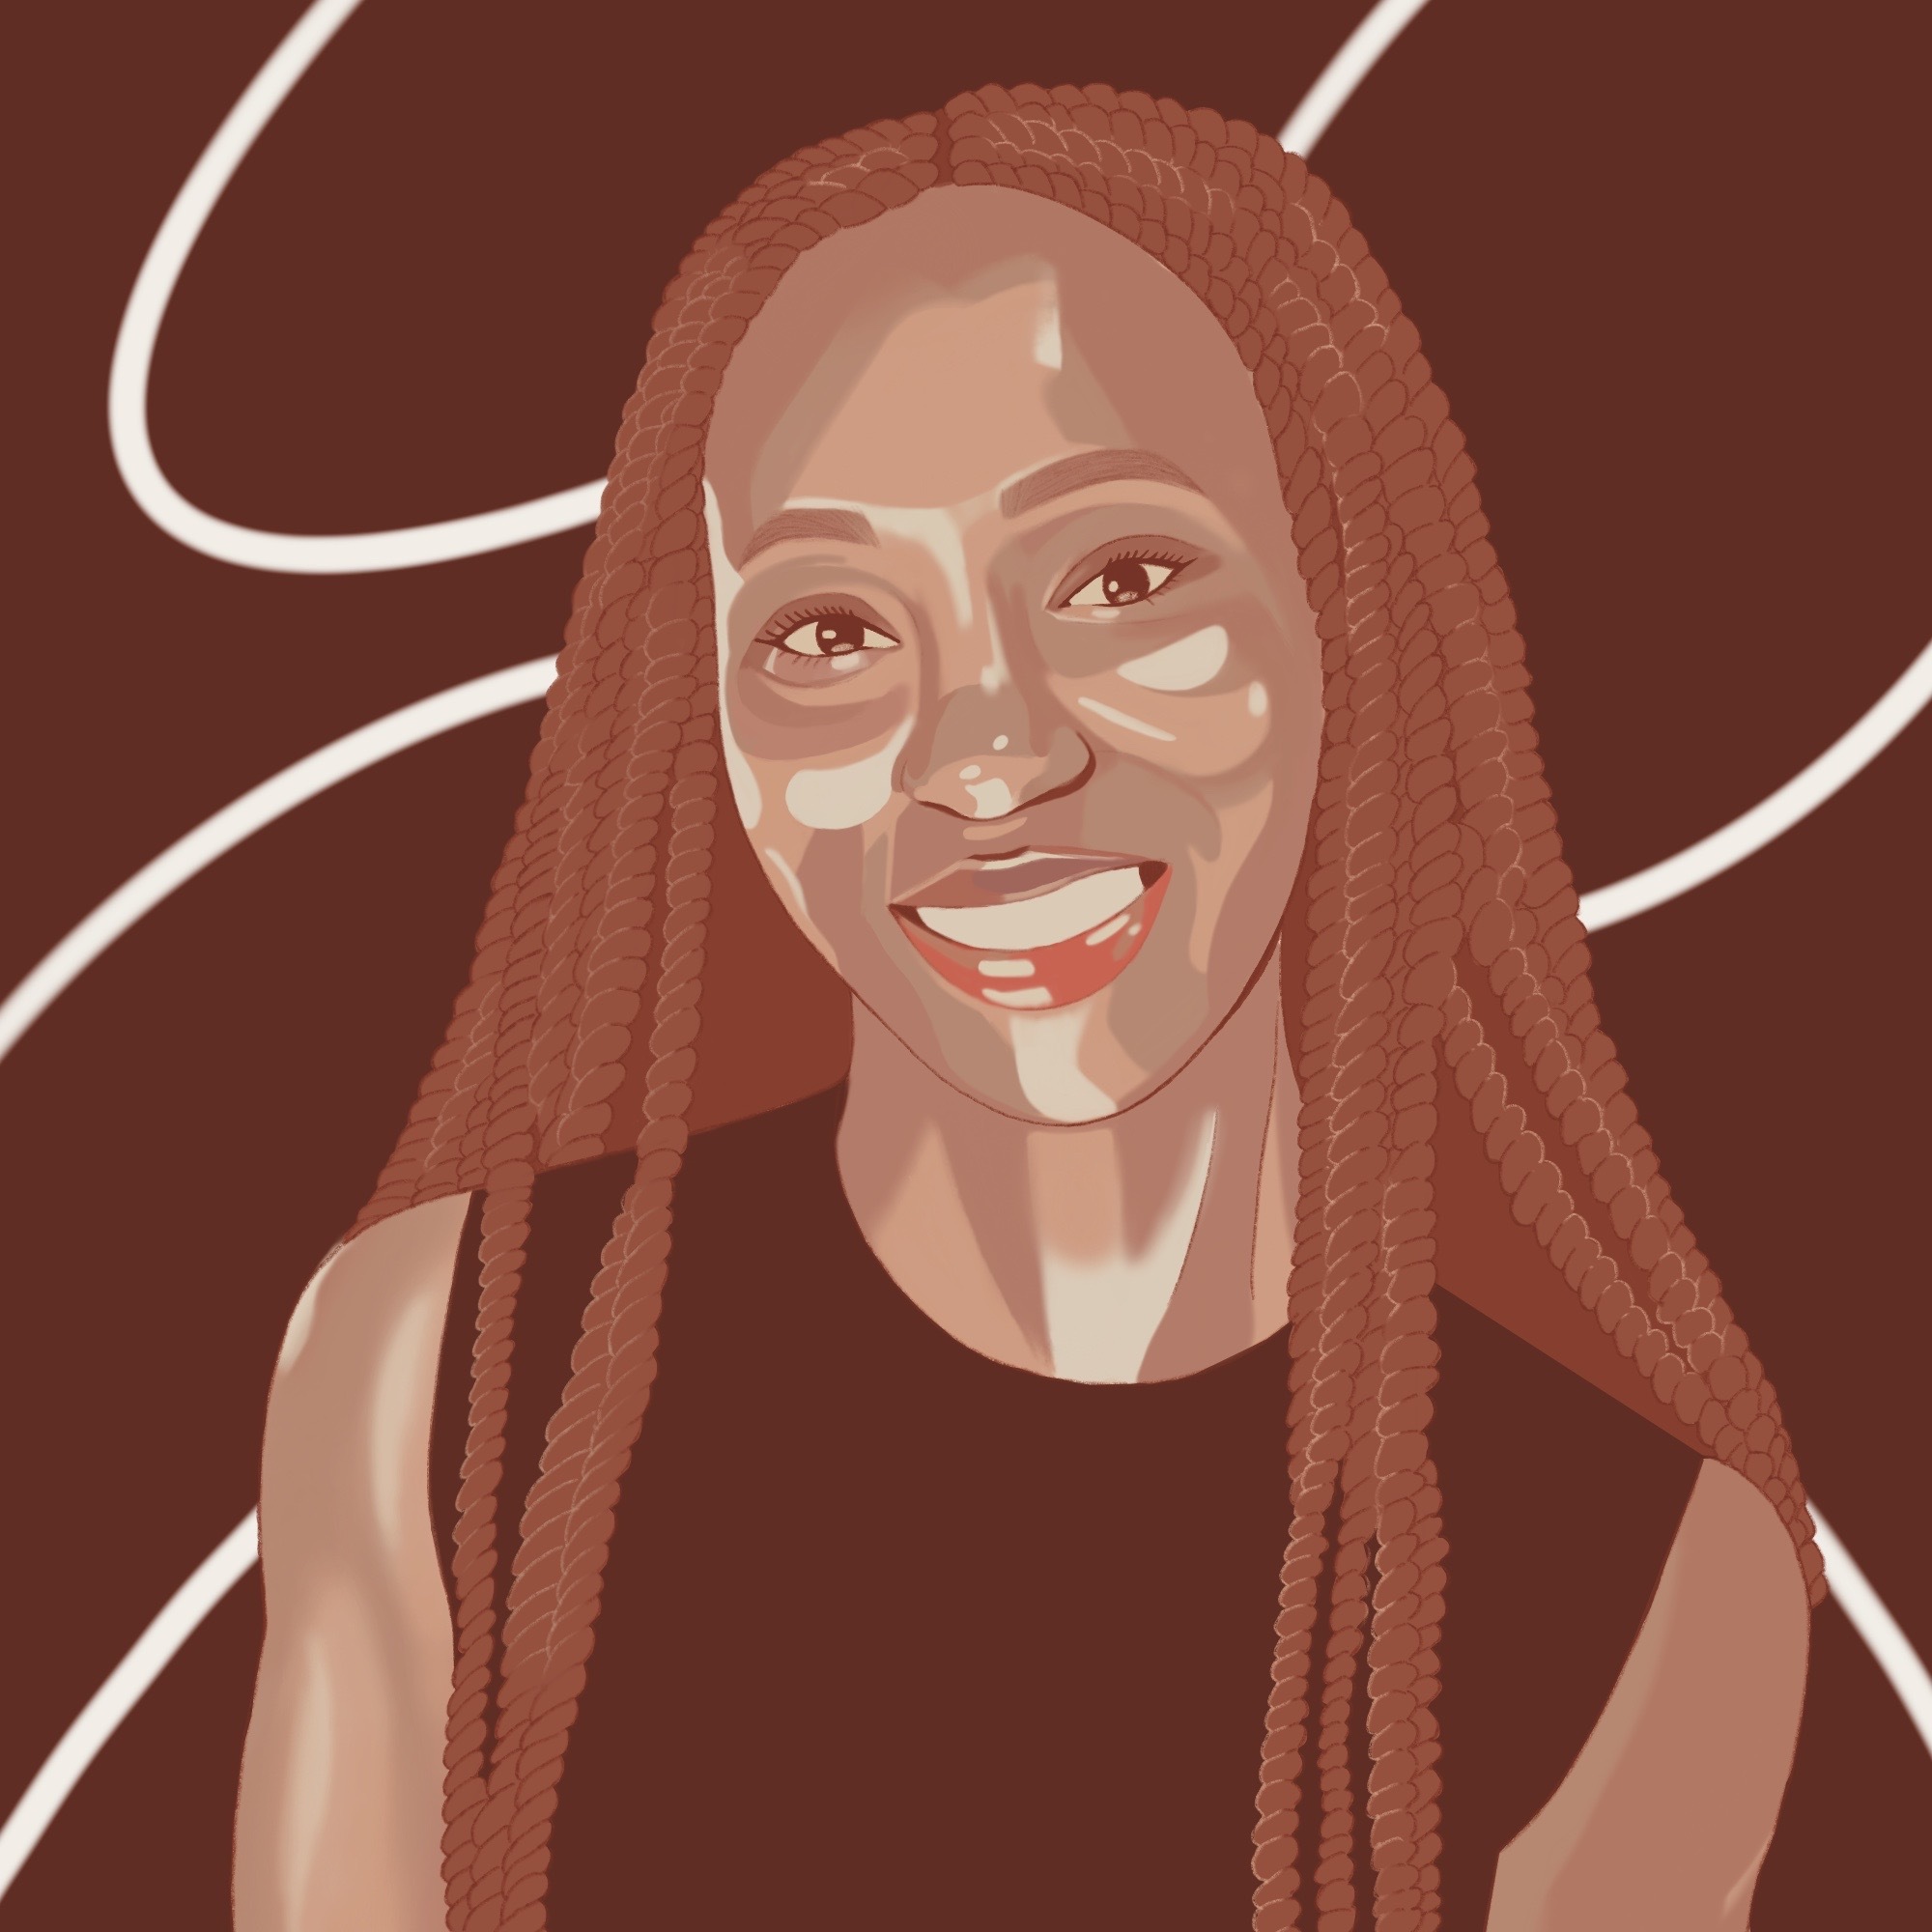 An illustrated portrait of Tekella Foster. She is looking forward while smiling.